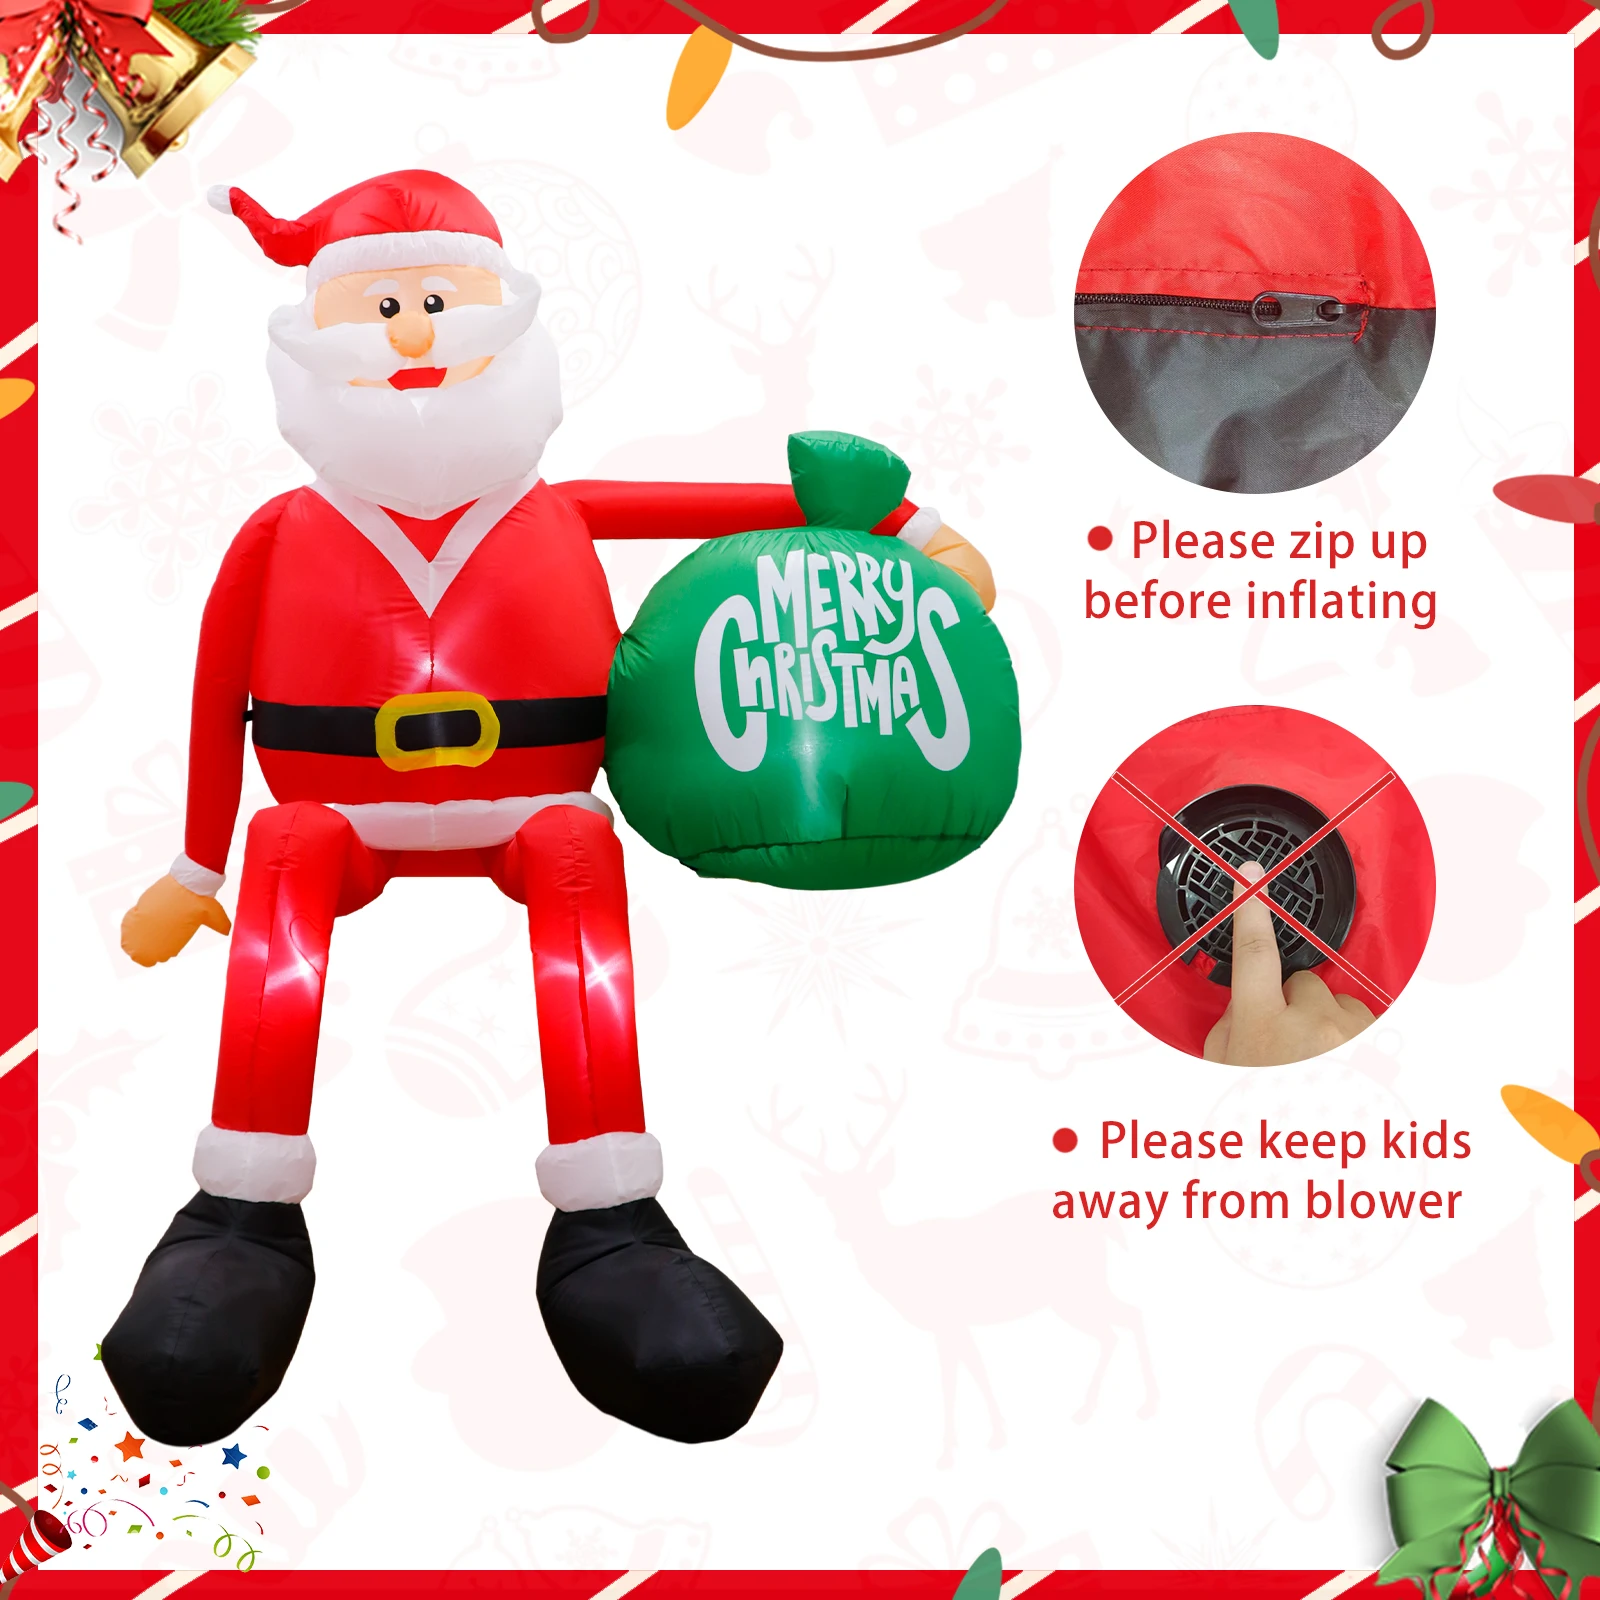 8FT Climbing Santa Christmas Inflatable Christmas Yard Decorations with LED, Christmas Blow up Yard Decoration for Outdoor Decor